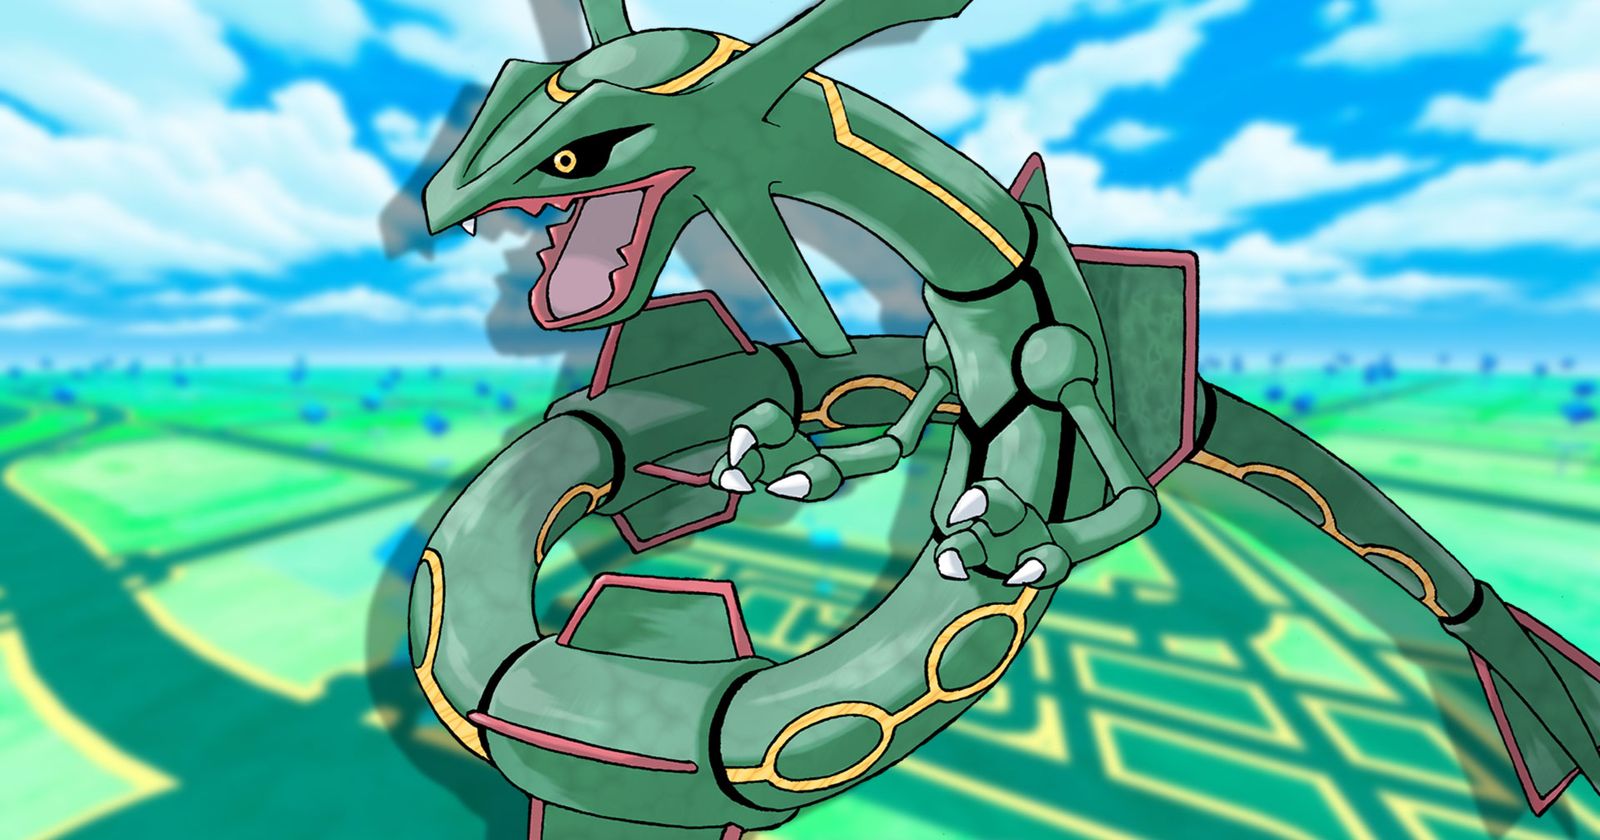 Pokemon Go: Legendary Rayquaza Guide - Counters, Weaknesses, Shiny Rayquaza,  And How To Catch Tips - GameSpot